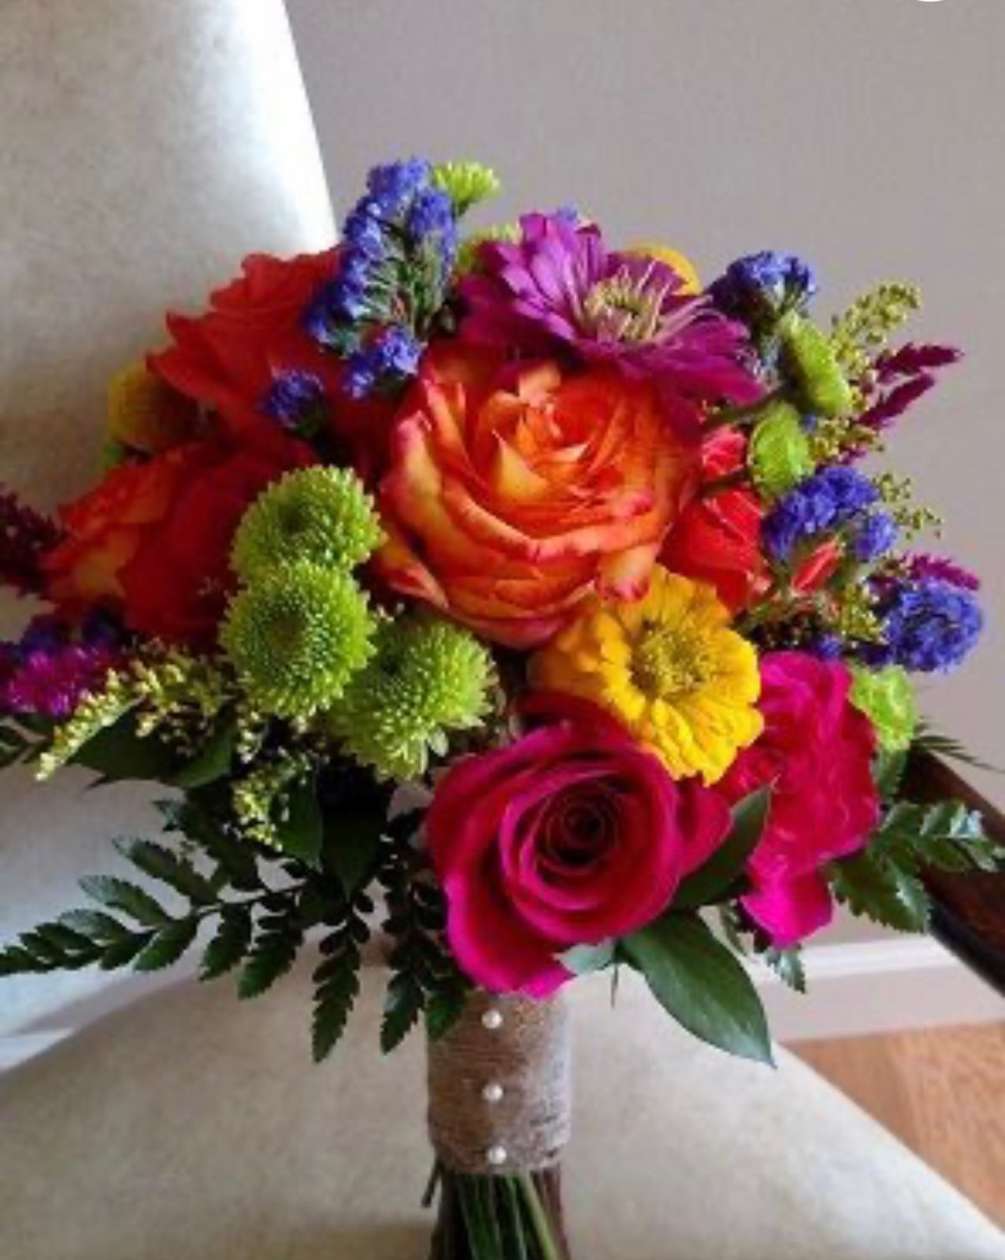 Mix of Roses, Mums, Statice, Zinnia (Gerbera daisy will be used in